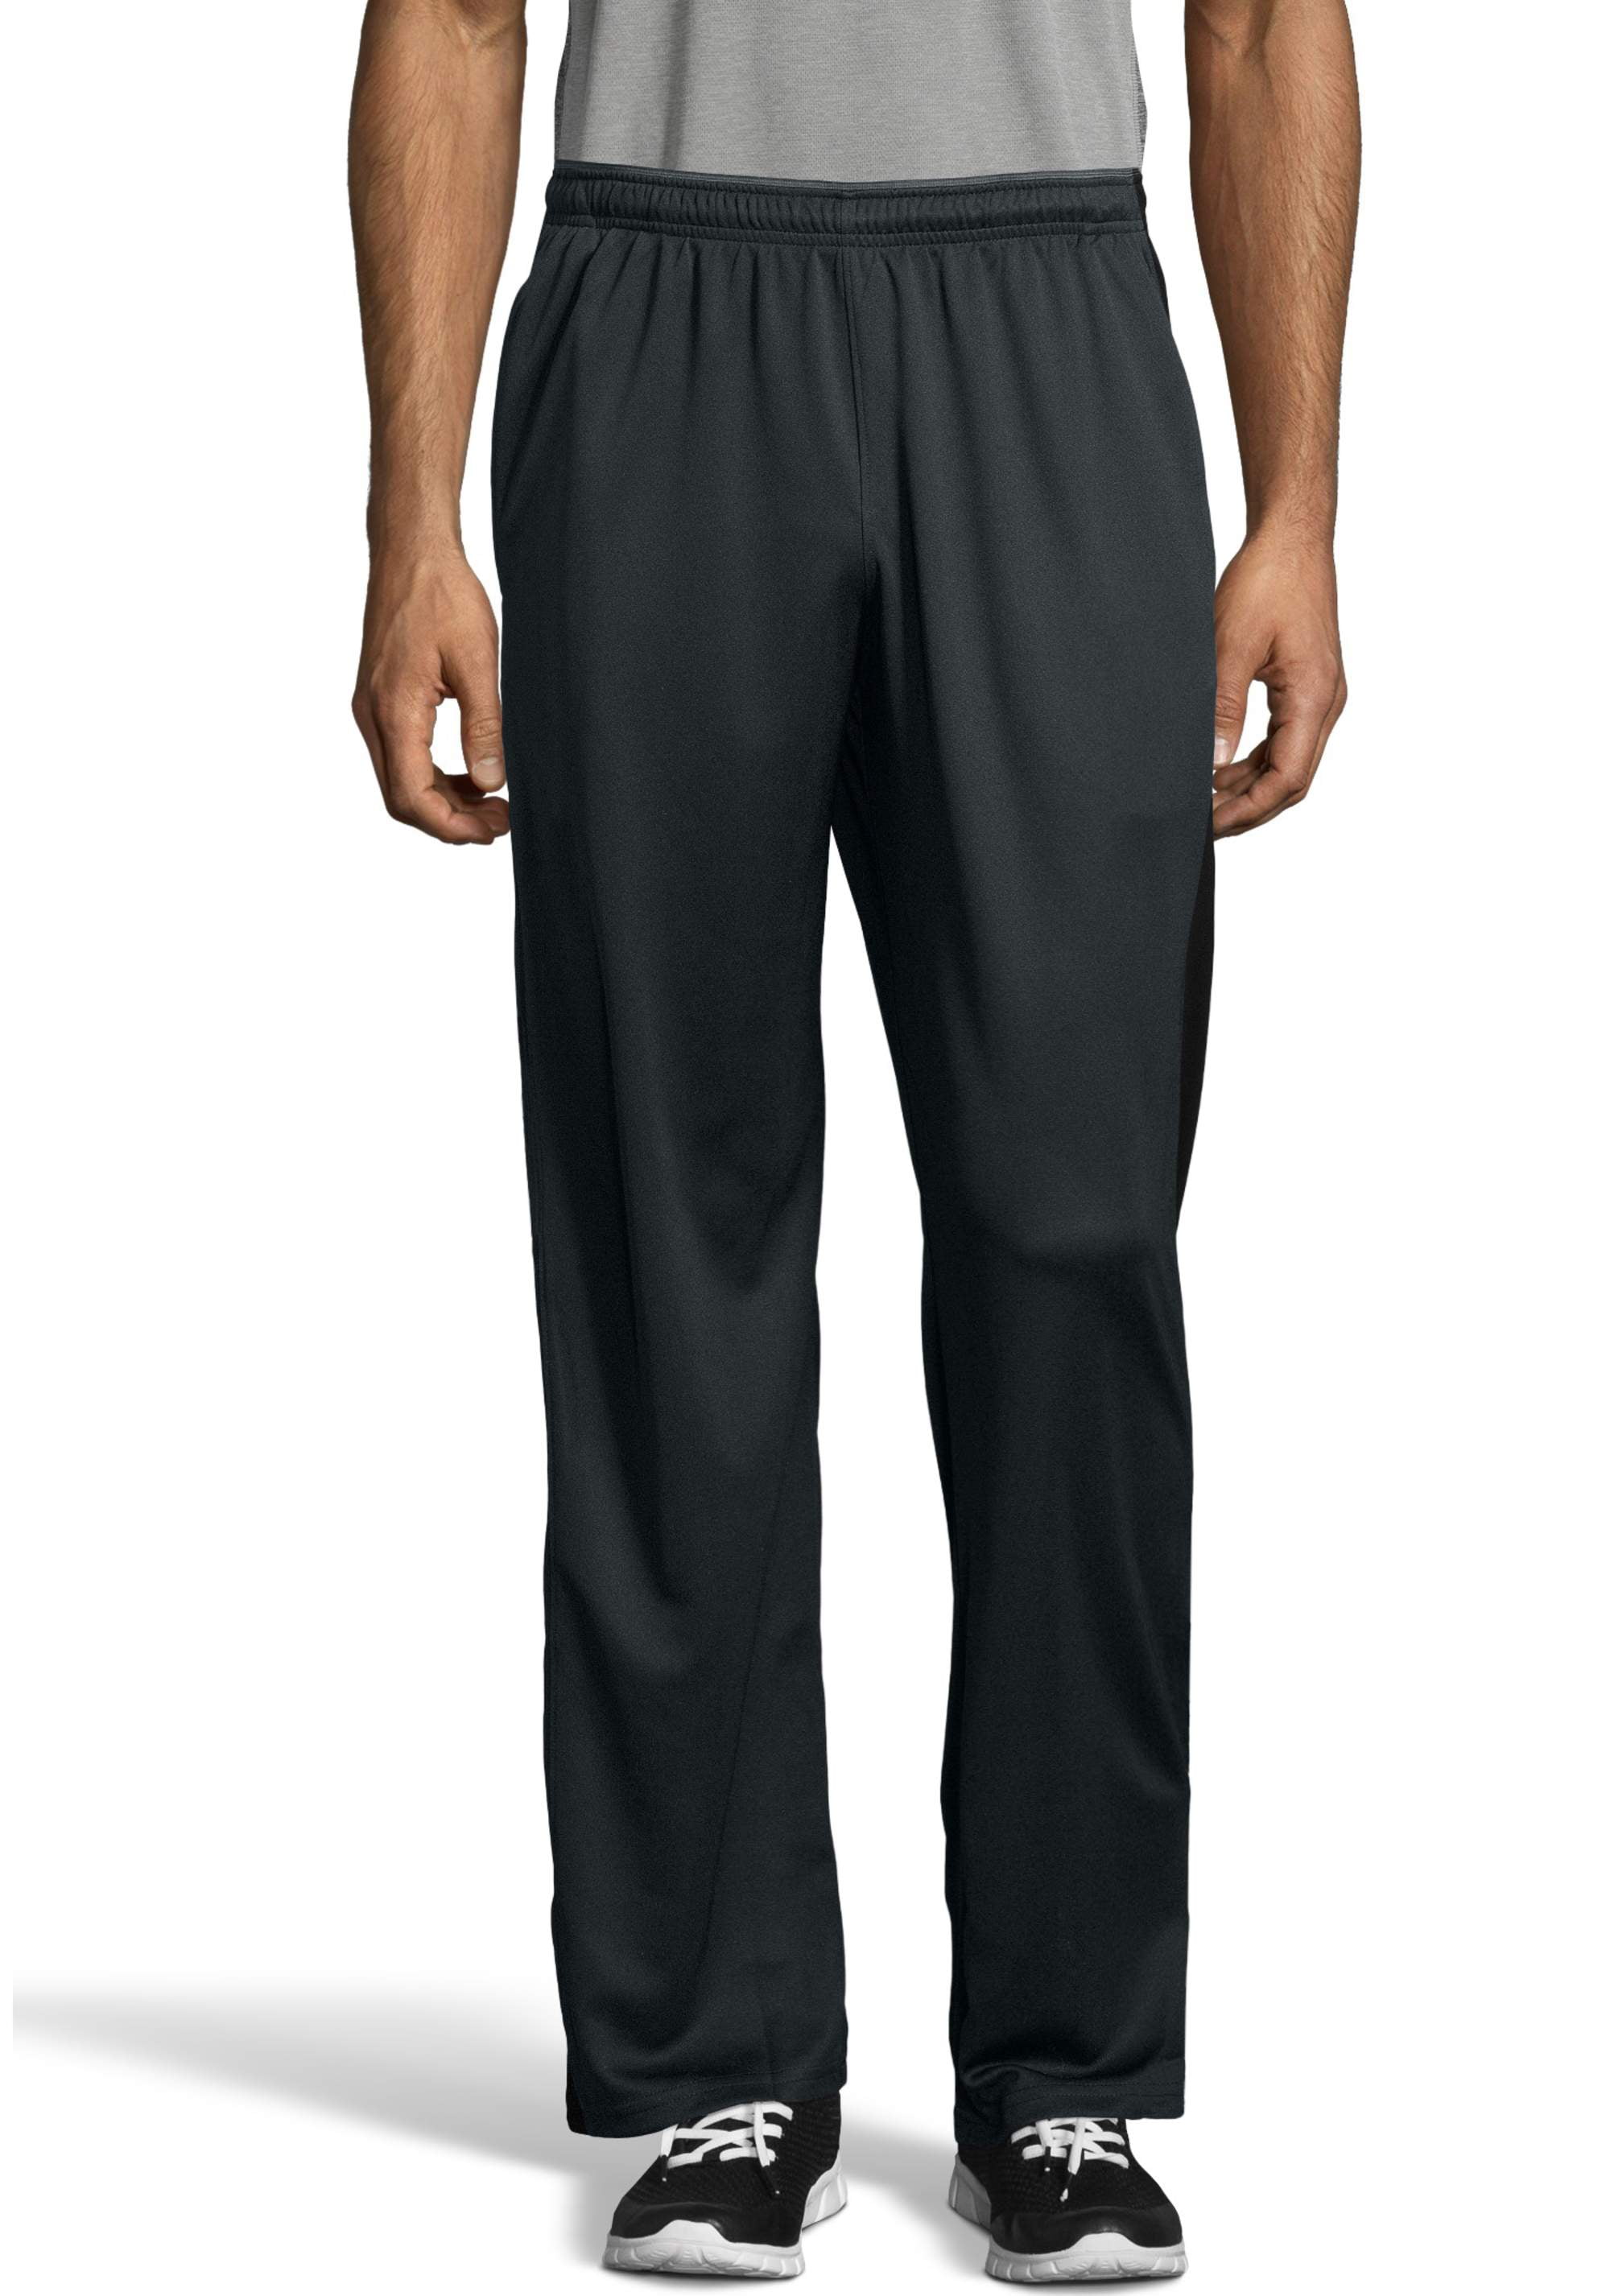 Hanes Sport Men's and Big Men's X-Temp Performance Training Pants with  Pockets, up to size 2XL